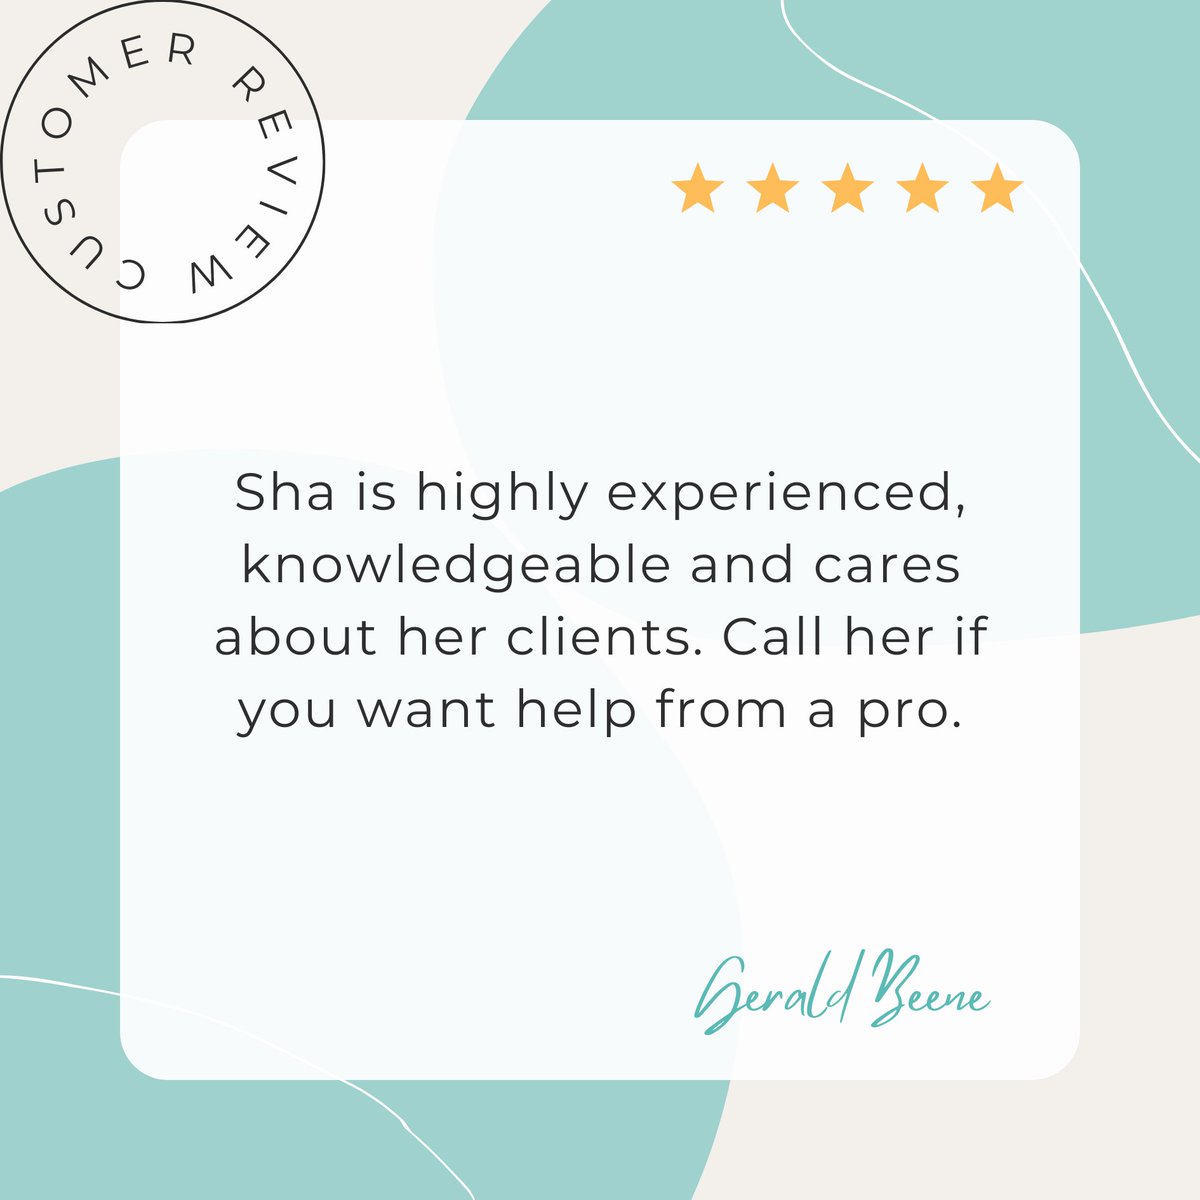 🌟 Grateful for your incredible 5-star review!  It was a pleasure assisting you! Thank you for trusting me with your real estate journey! 🏡

#HappyClients #realestatesuccess #dfwrealtor #texasrealtor #shasellsrealestate #shahairrealtor